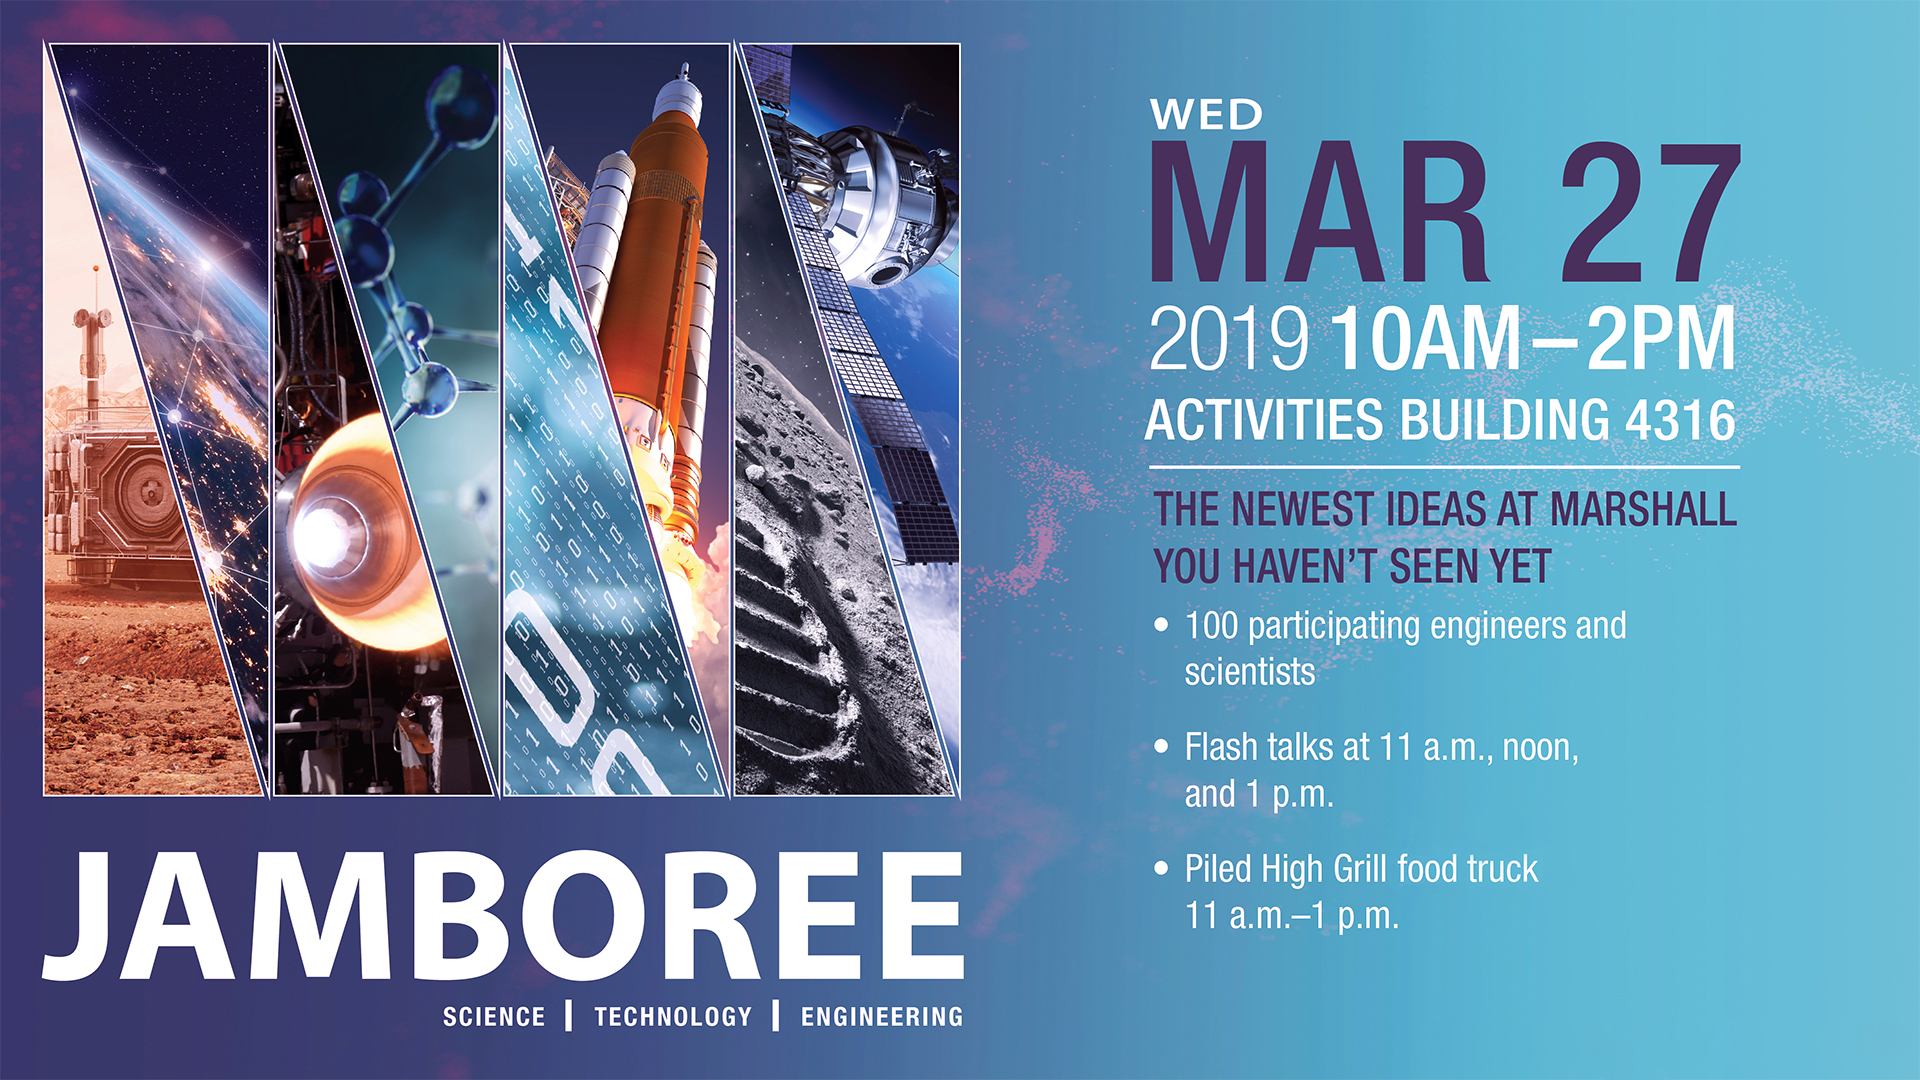 NASA’s Marshall Space Flight Center team members are invited to the 2019 Science, Technology and Engineering Jamboree on March 2